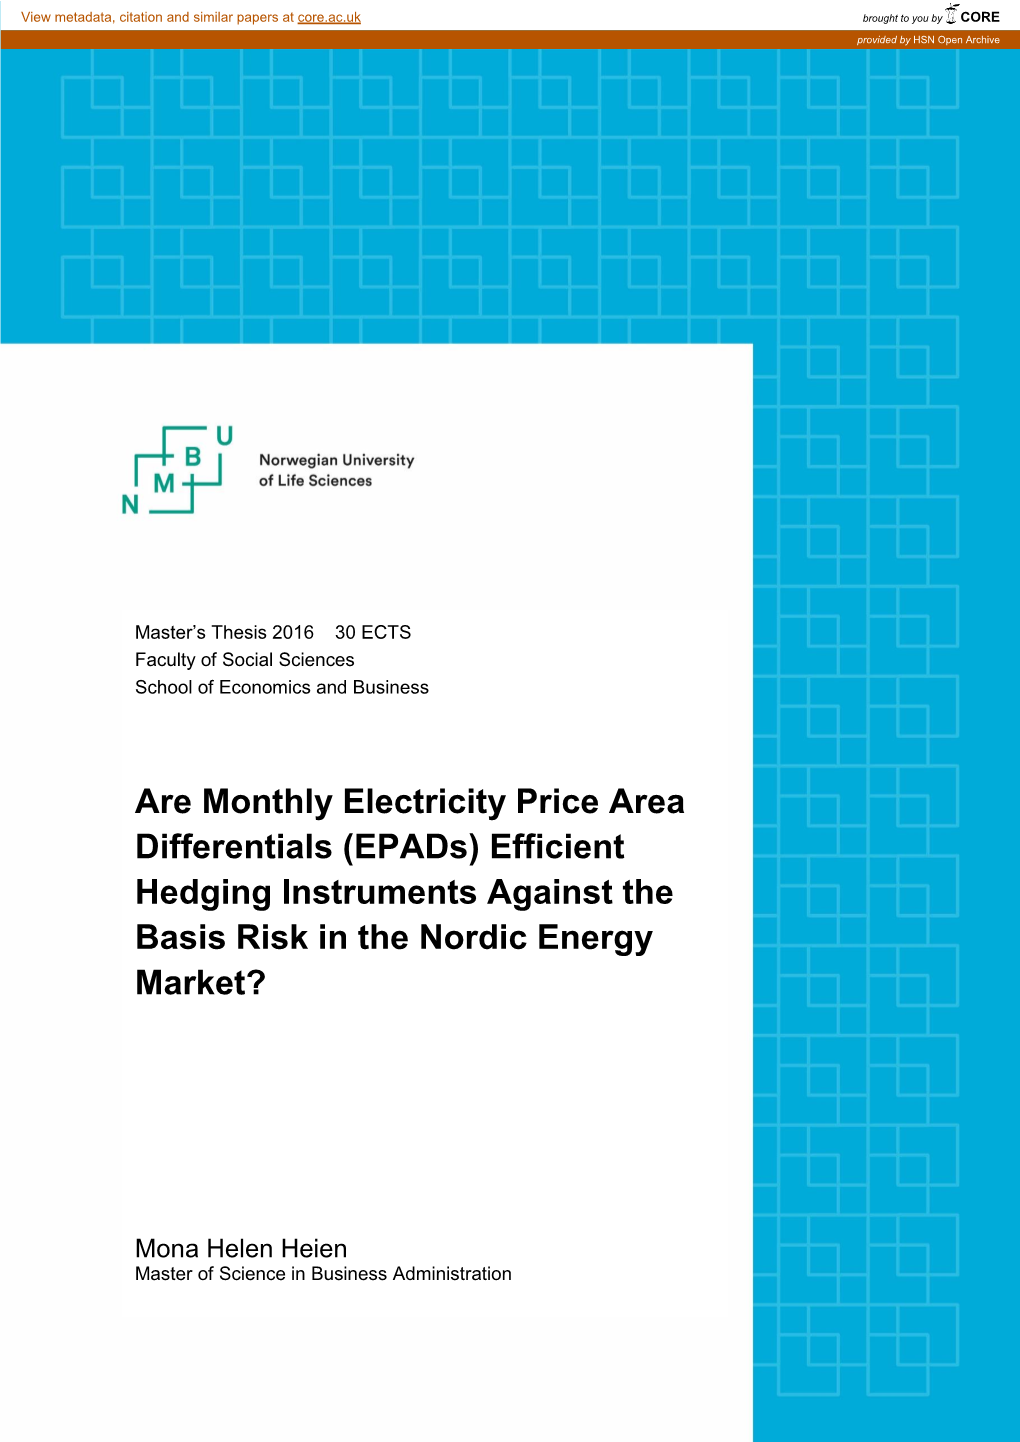 Are Monthly Electricity Price Area Differentials (Epads) Efficient Hedging Instruments Against the Basis Risk in the Nordic Energy Market?